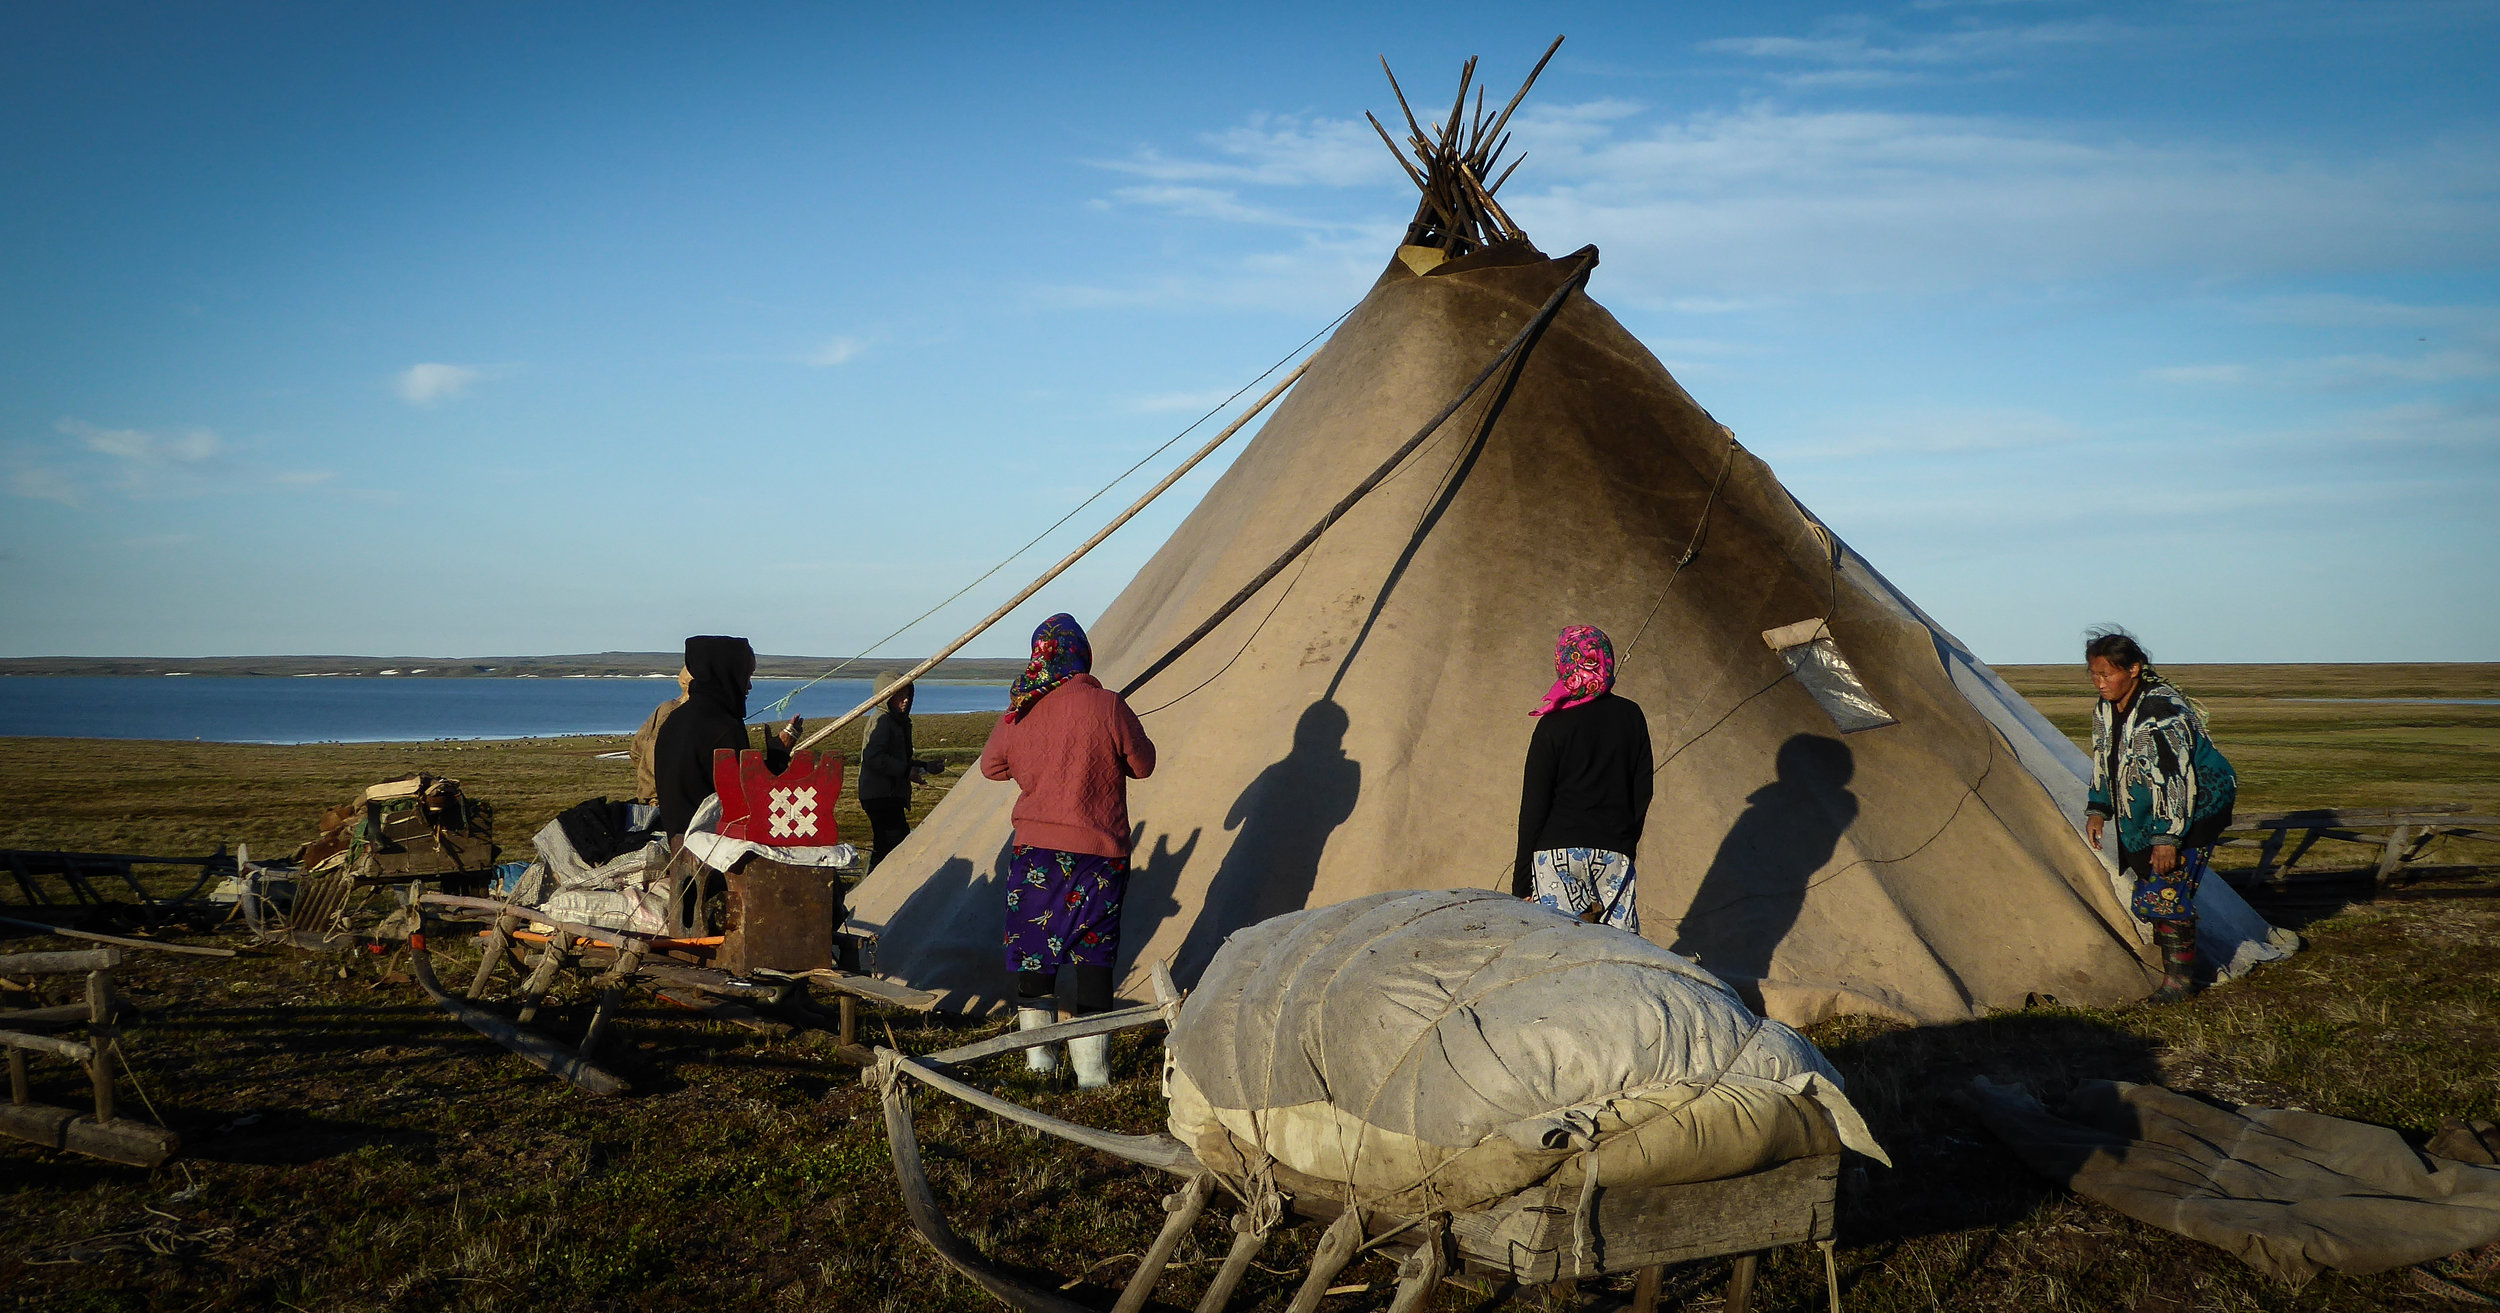 The Nenets’ traditional dwelling tent is called “chum” in Russian, a word derived from the Udmurt language. The Nenets word for the structure is “mya”. JONAA©Zoia Vylka Ravna